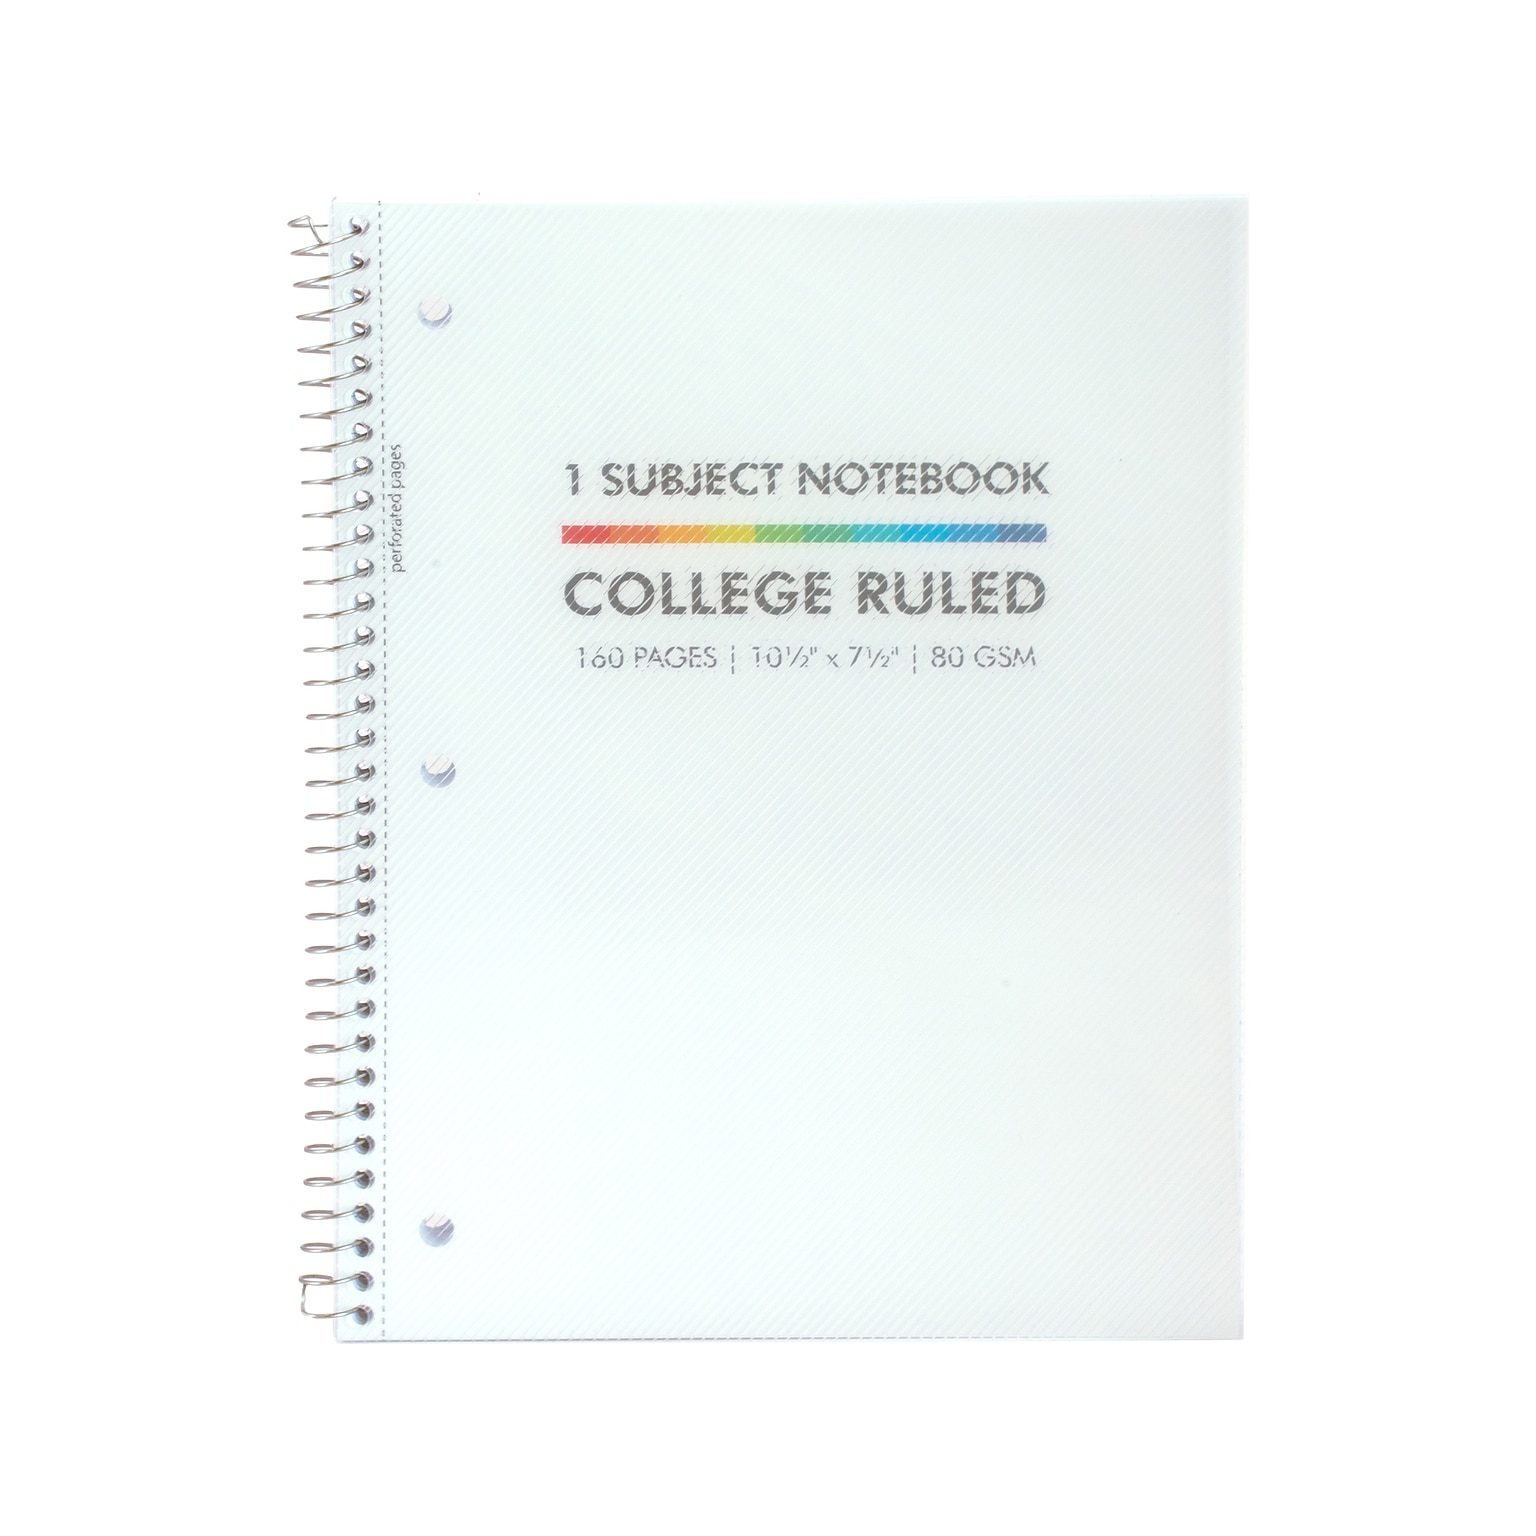 Pukka Pad Basics Subject Notebook, 7.5 x 10.5, College-Ruled, 80 Sheets, White, 3/Pack (9759-BAS)